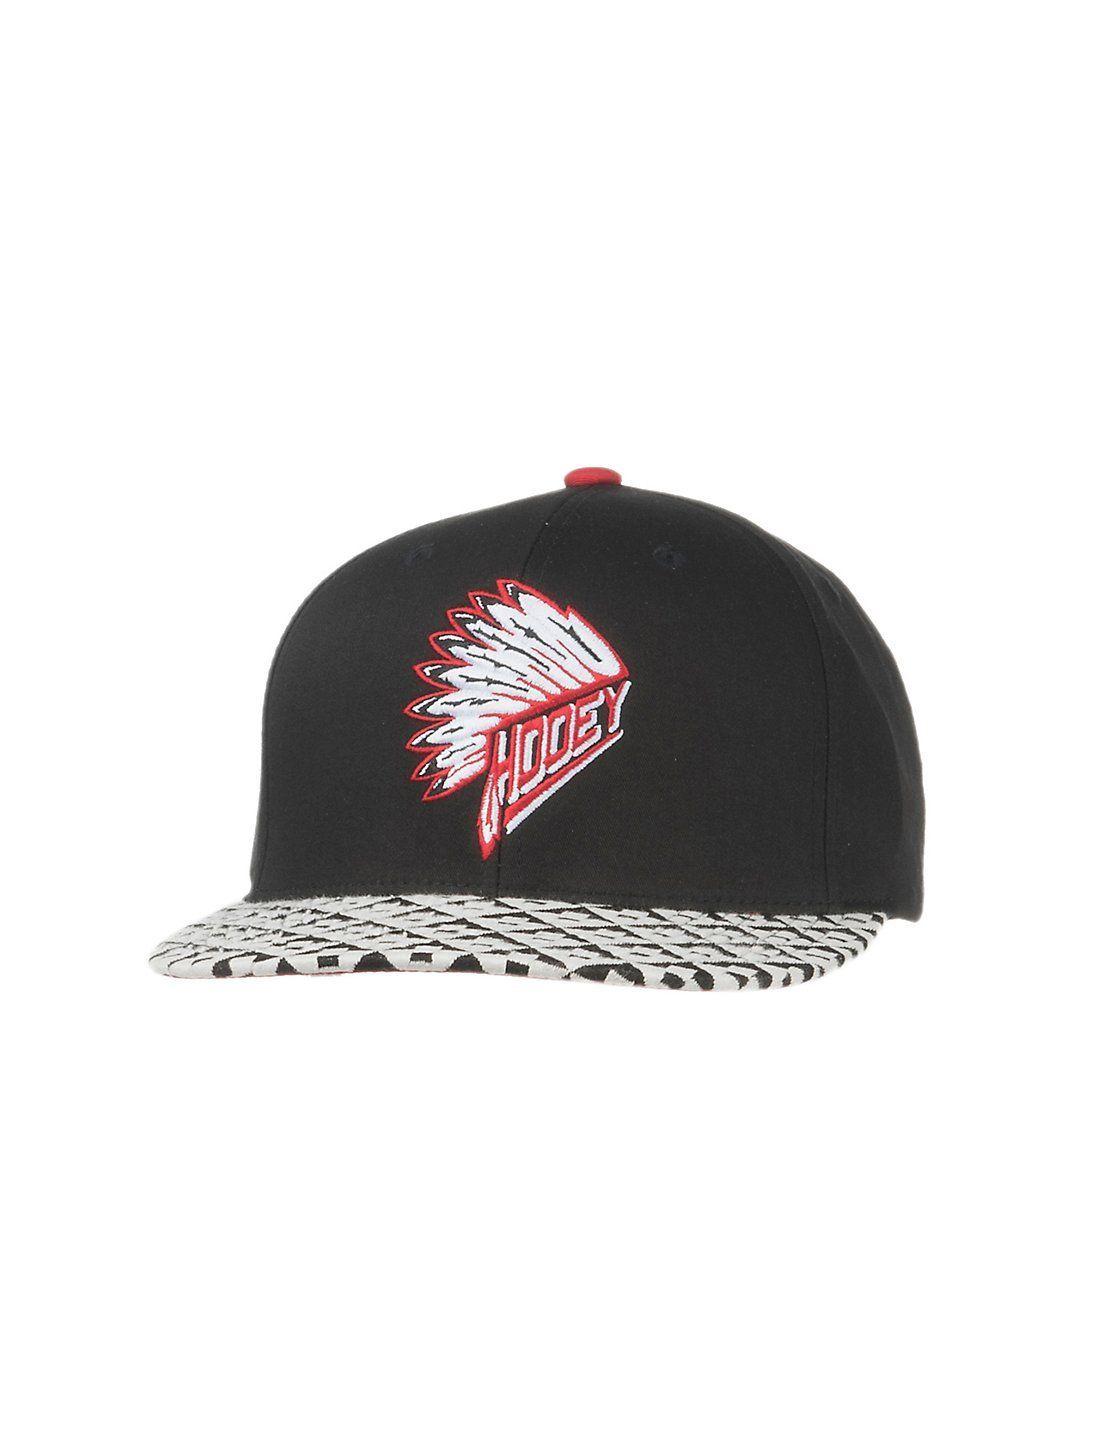 Red and Black Cowboy Logo - HOOey Black with Aztec Print Brim and Red Chief Headdress Logo Snap ...